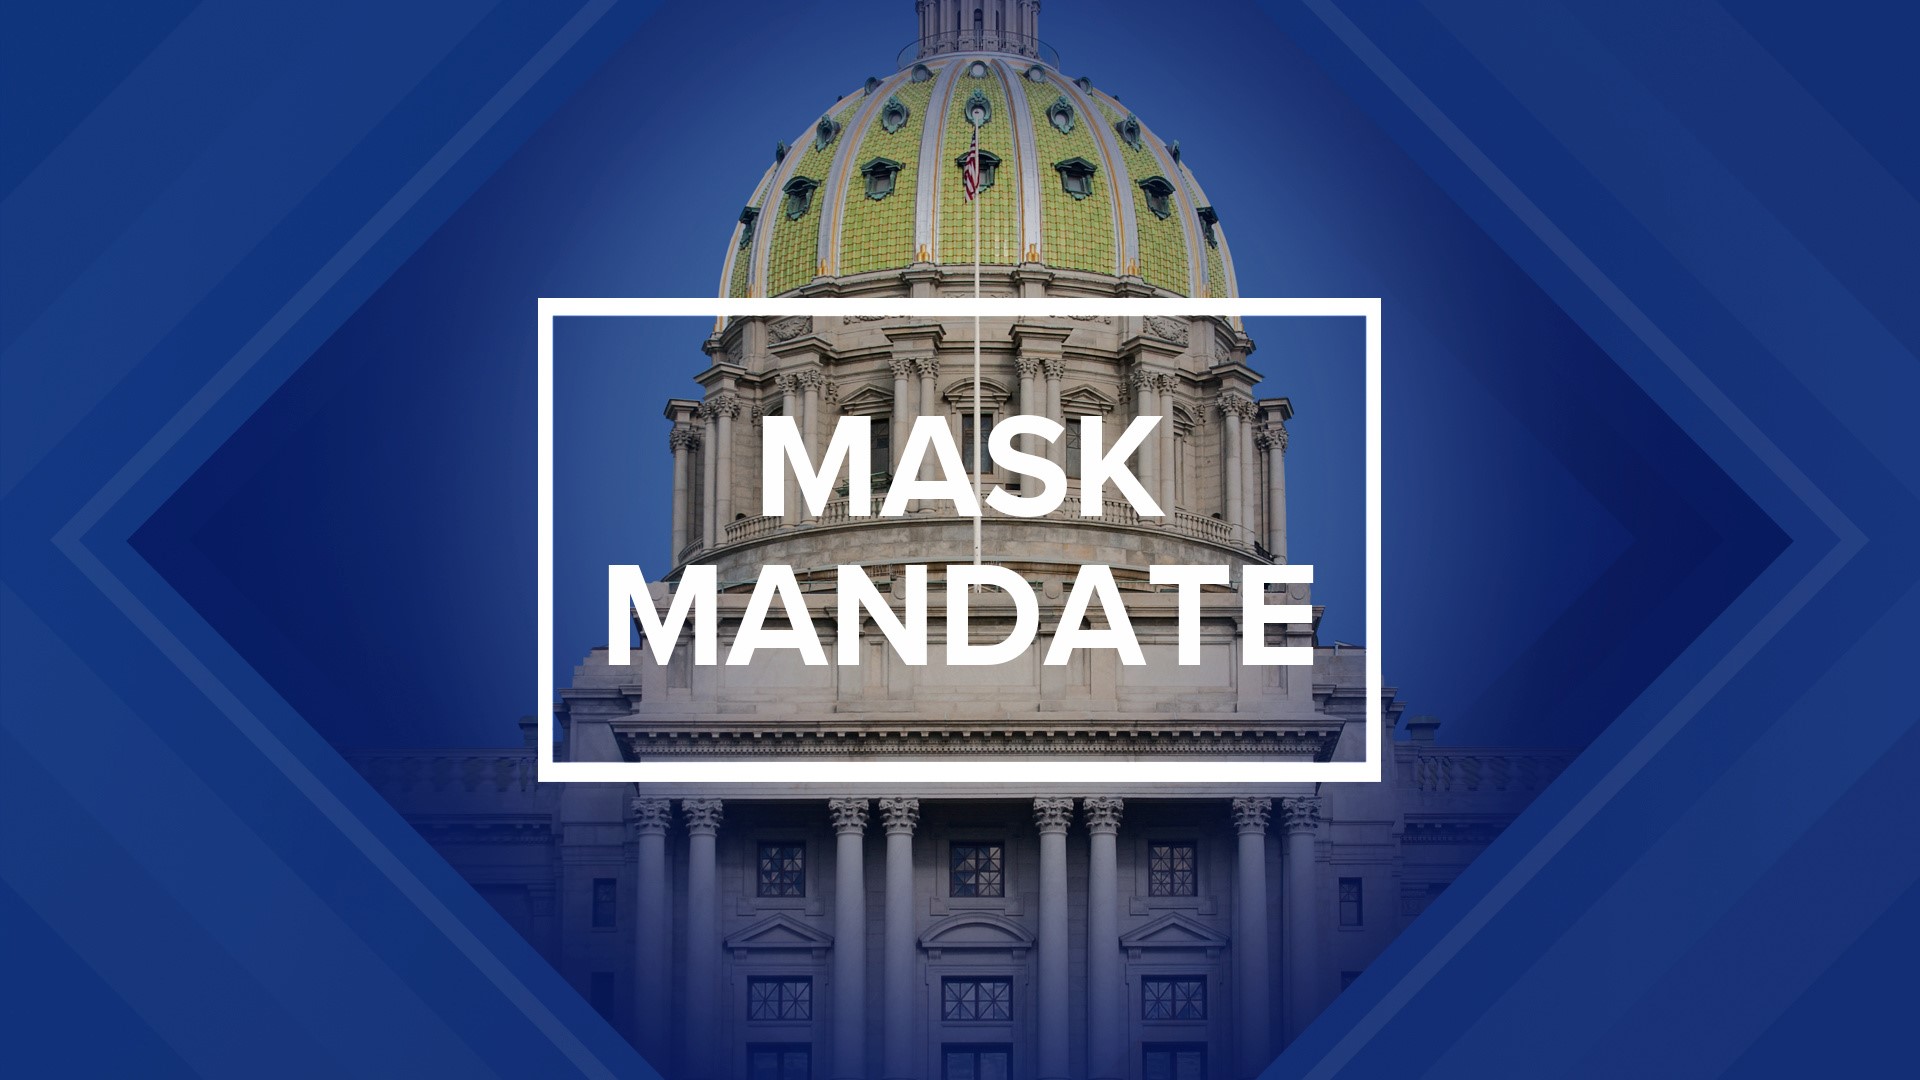 Individuals who have not yet been vaccinated or are partially vaccinated are still encouraged to wear a mask when in public.